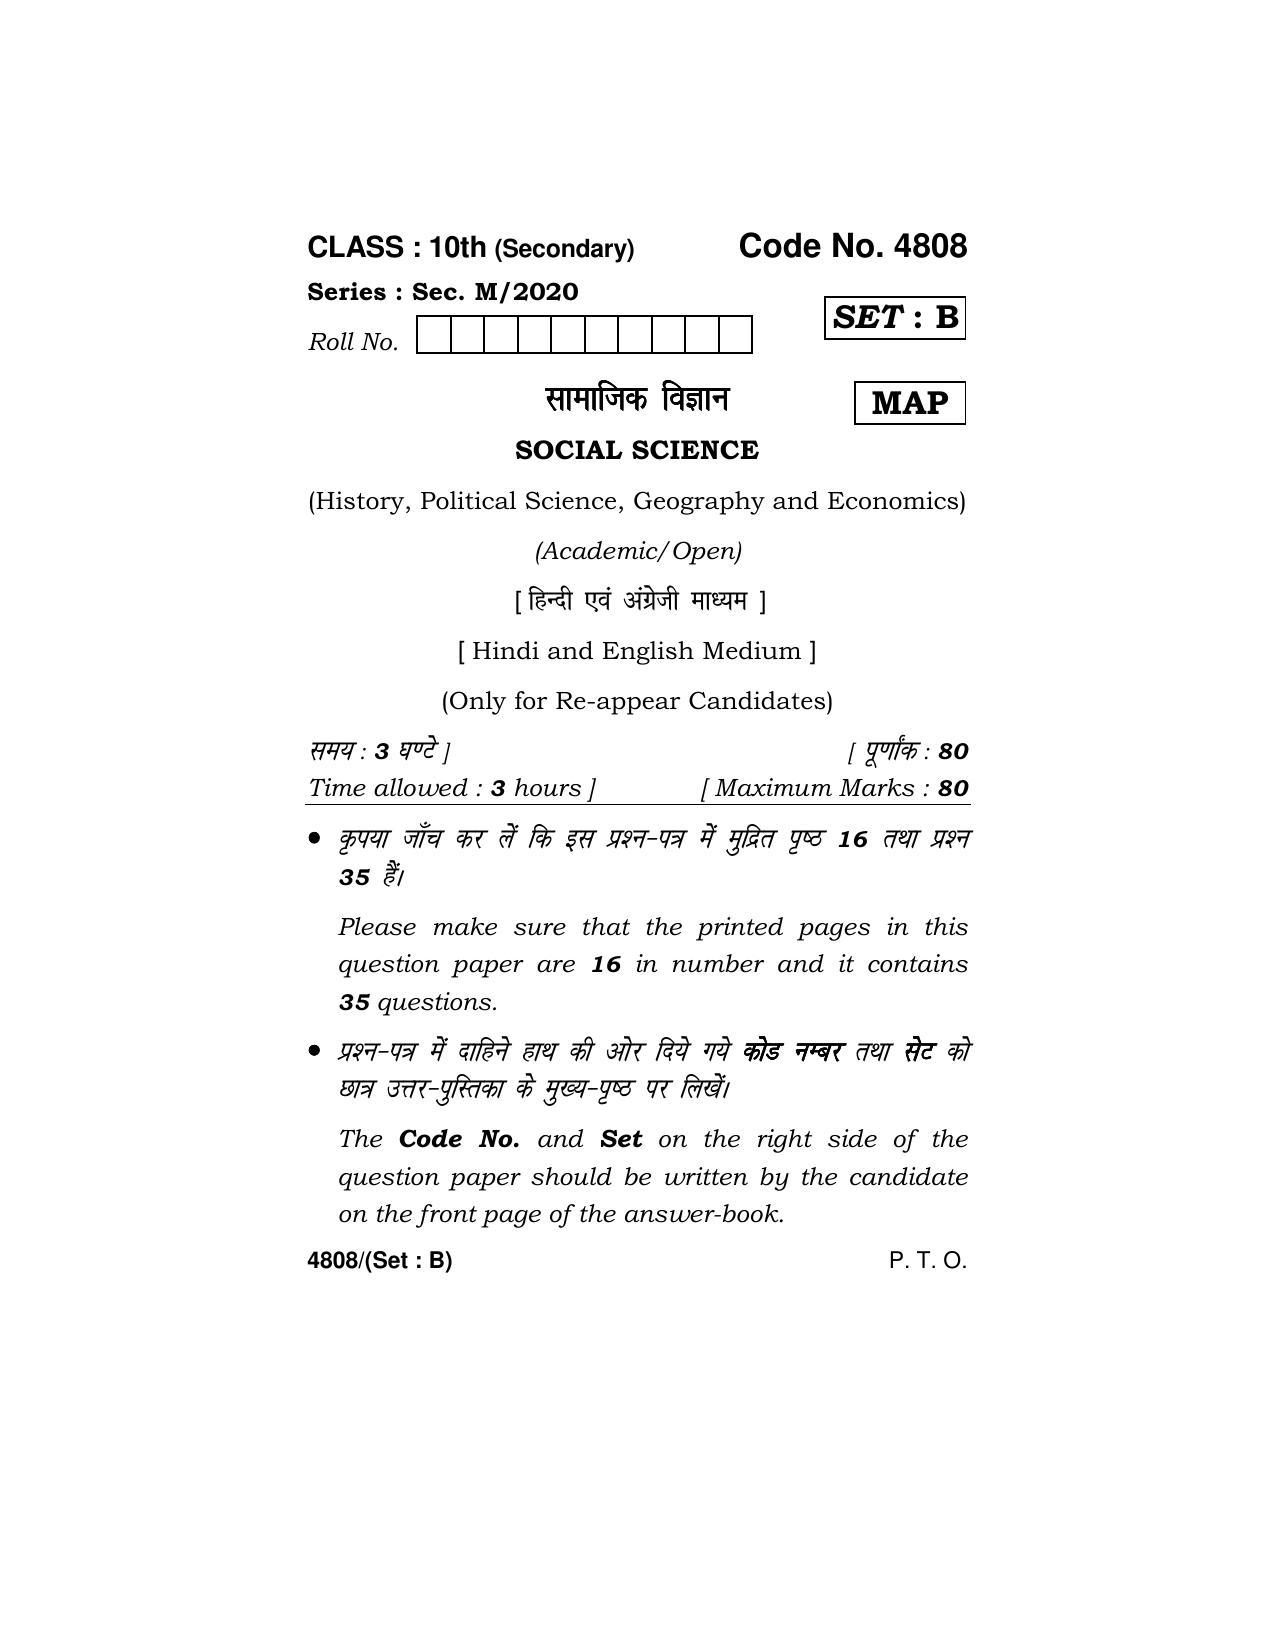 Haryana Board HBSE Class 10 Social Science (Re-appear) 2020 Question Paper - Page 17